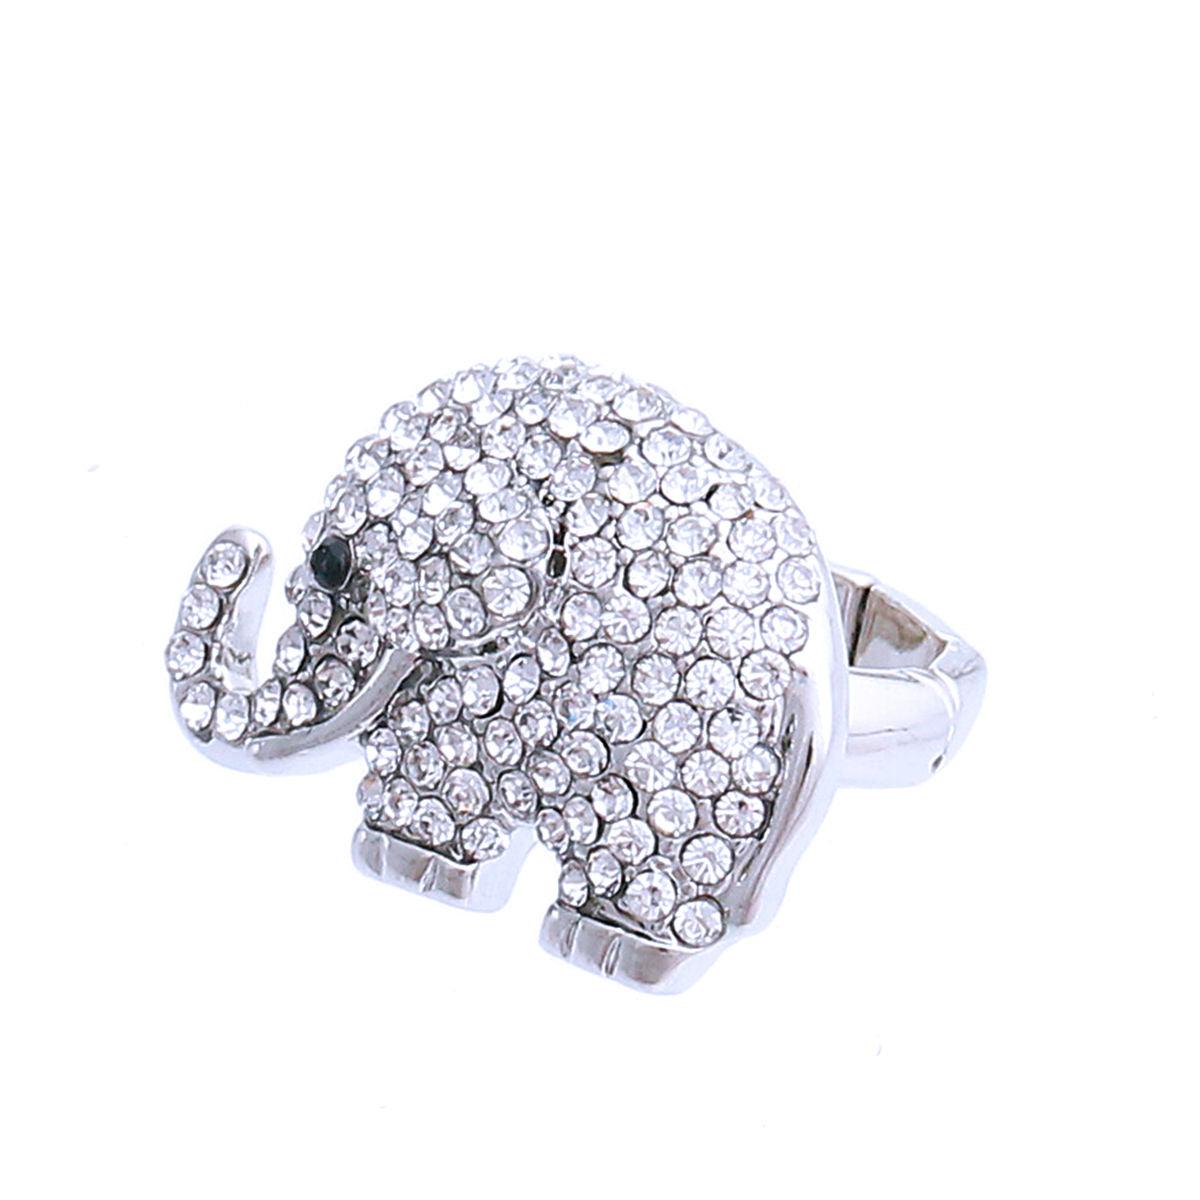 Rhinestone Accented Elephant Ring in Silver-tone